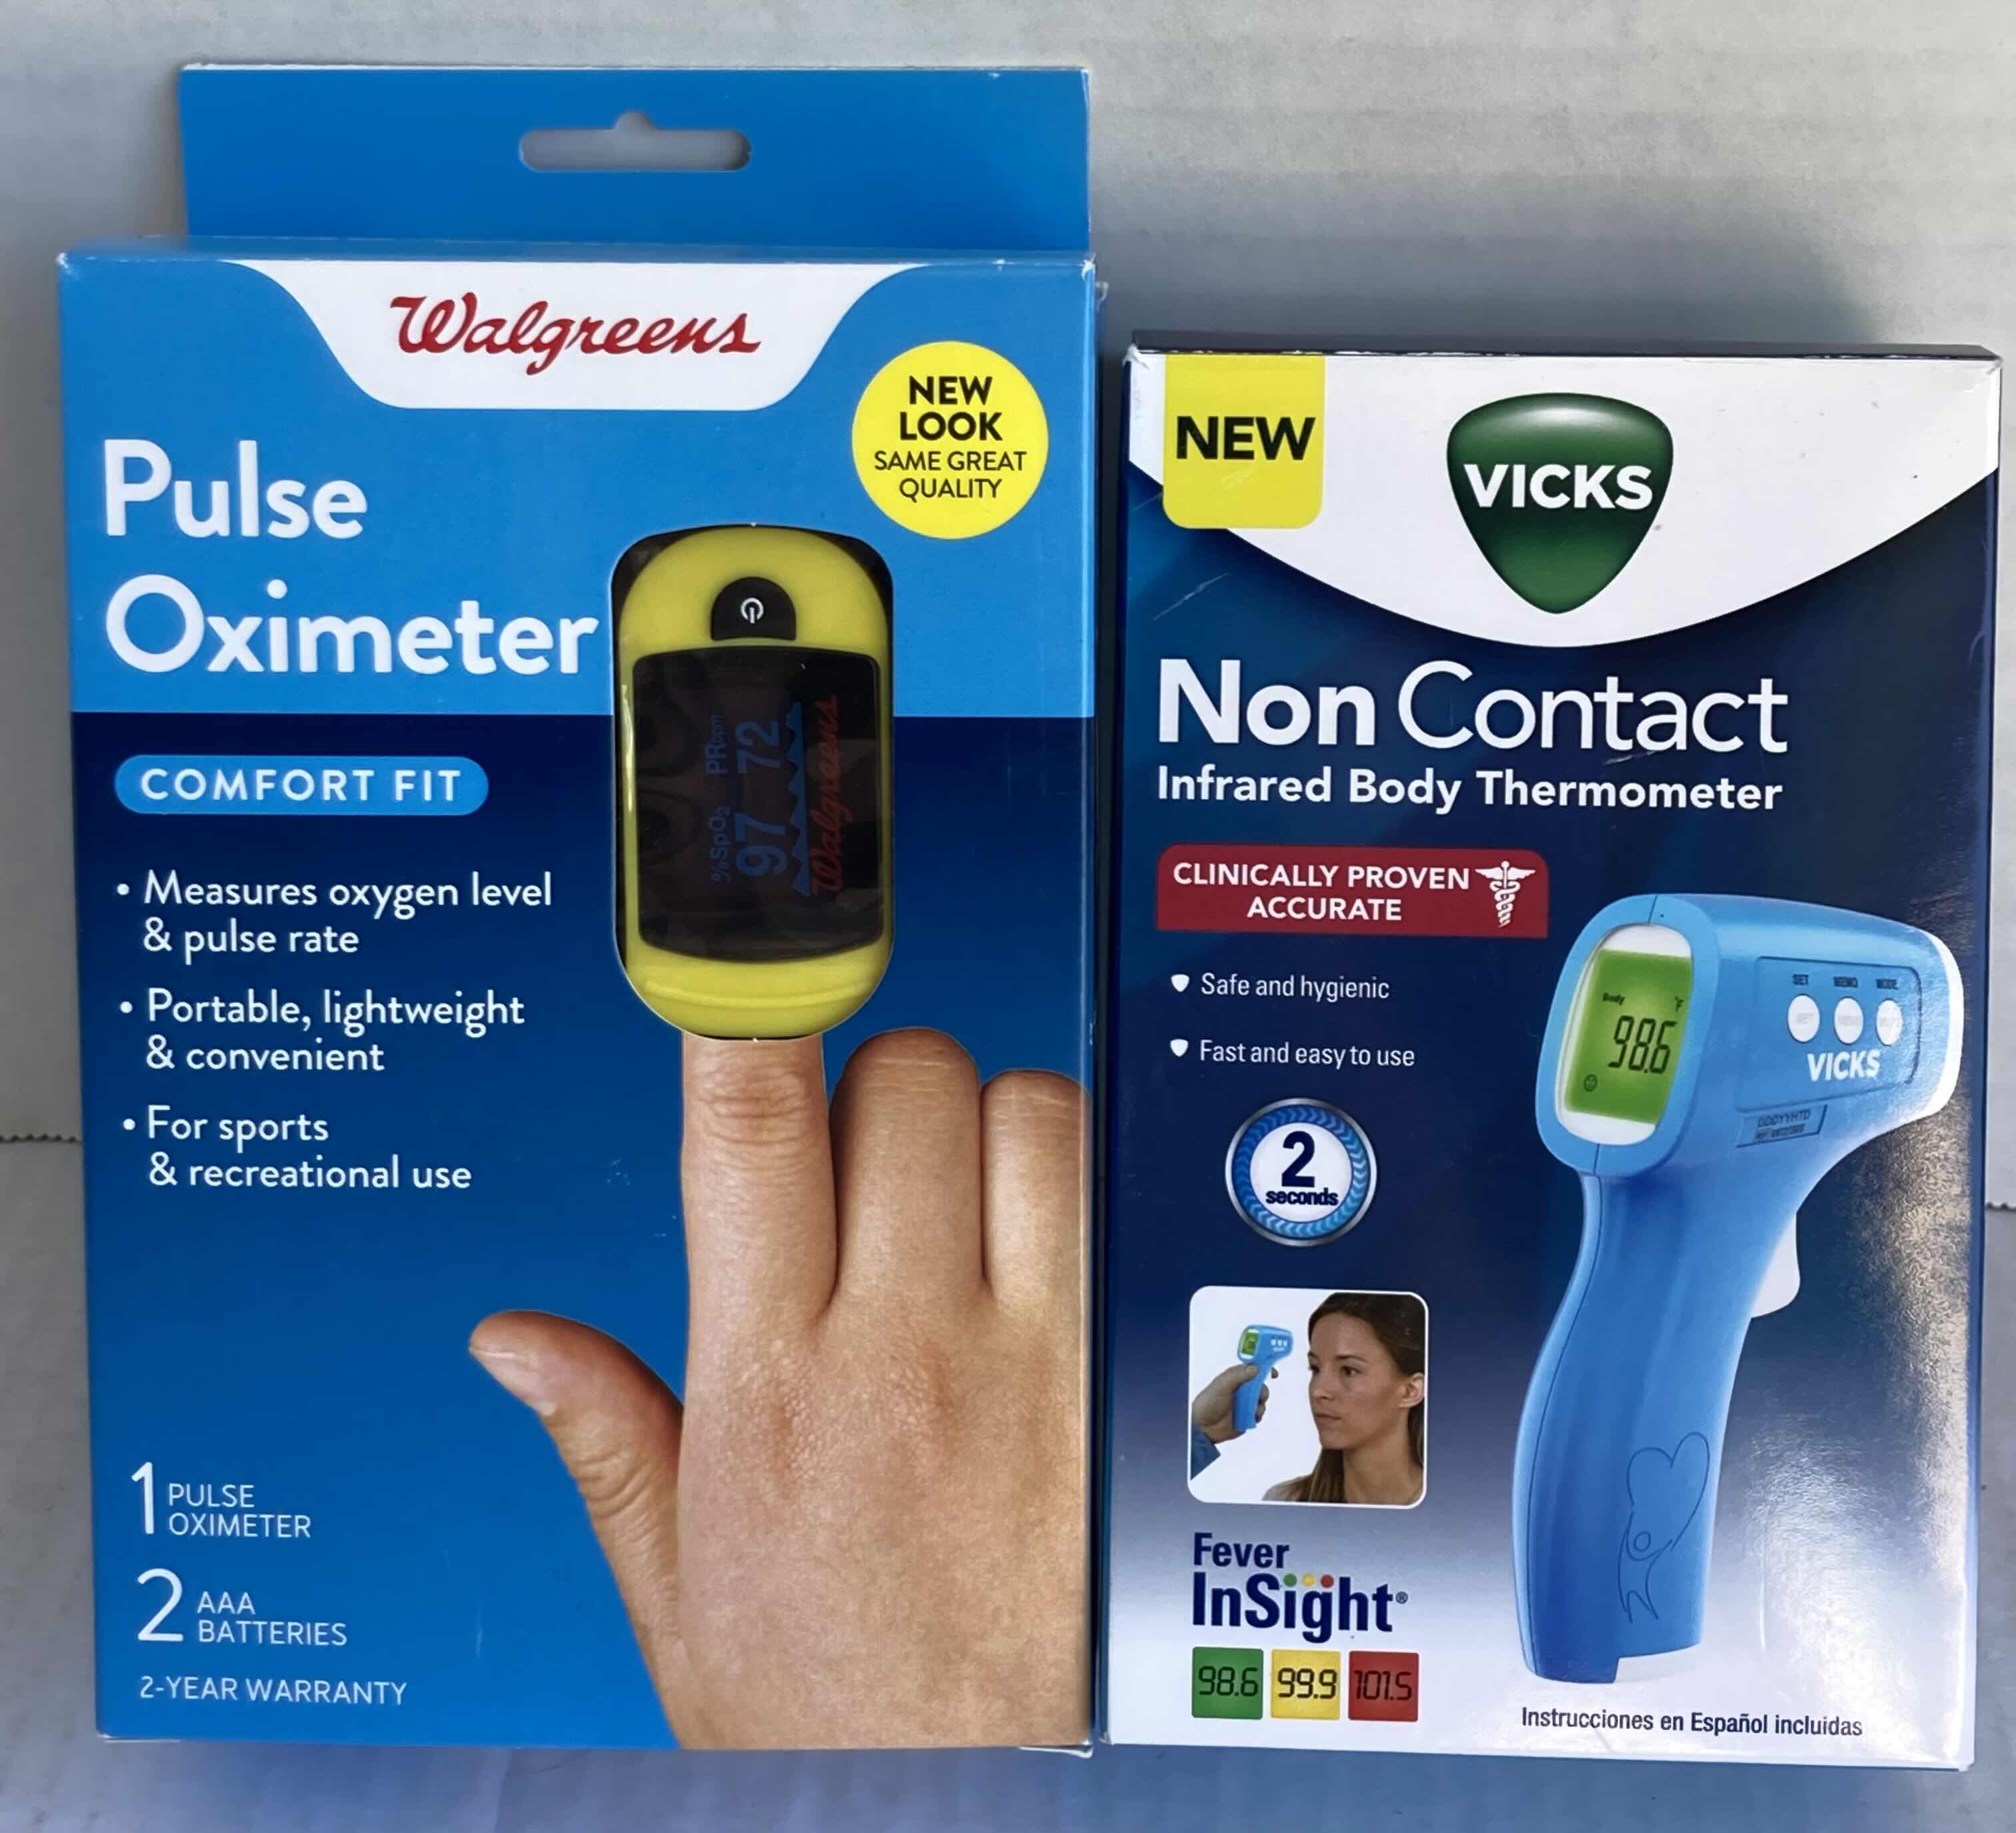 Photo 1 of NEW WALGREENS PULSE OXIMETER COMFORT FIT & VICKS NON CONTACT INFRARED BODY THERMOMETER